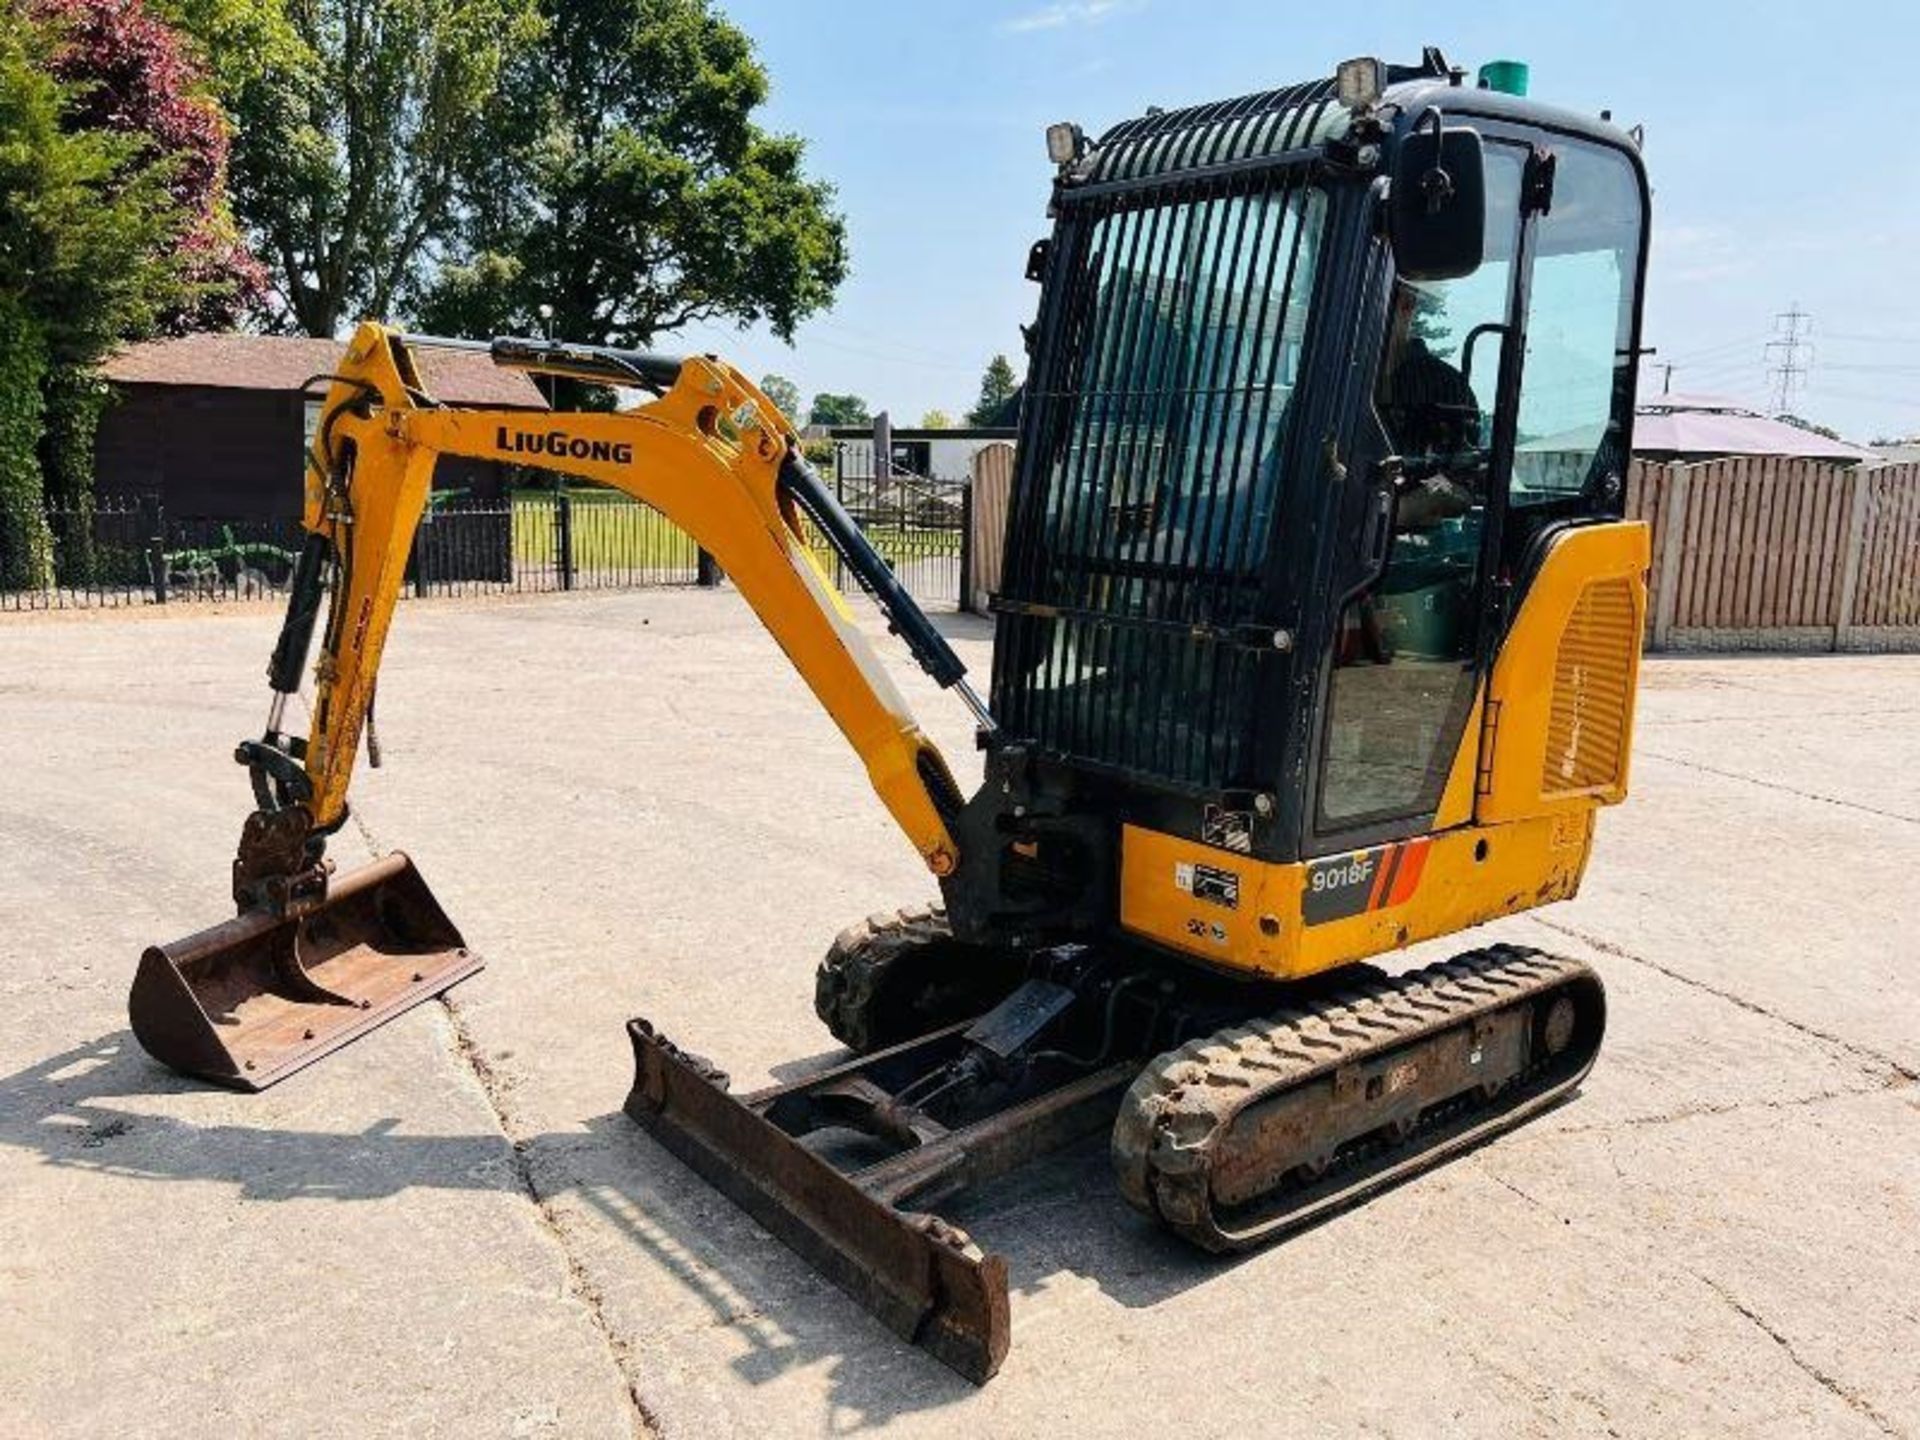 LIUGONG 9018F EXCAVATOR *YEAR 2020, 543 HOURS, ONE OWNER FROM NEW - Image 11 of 16